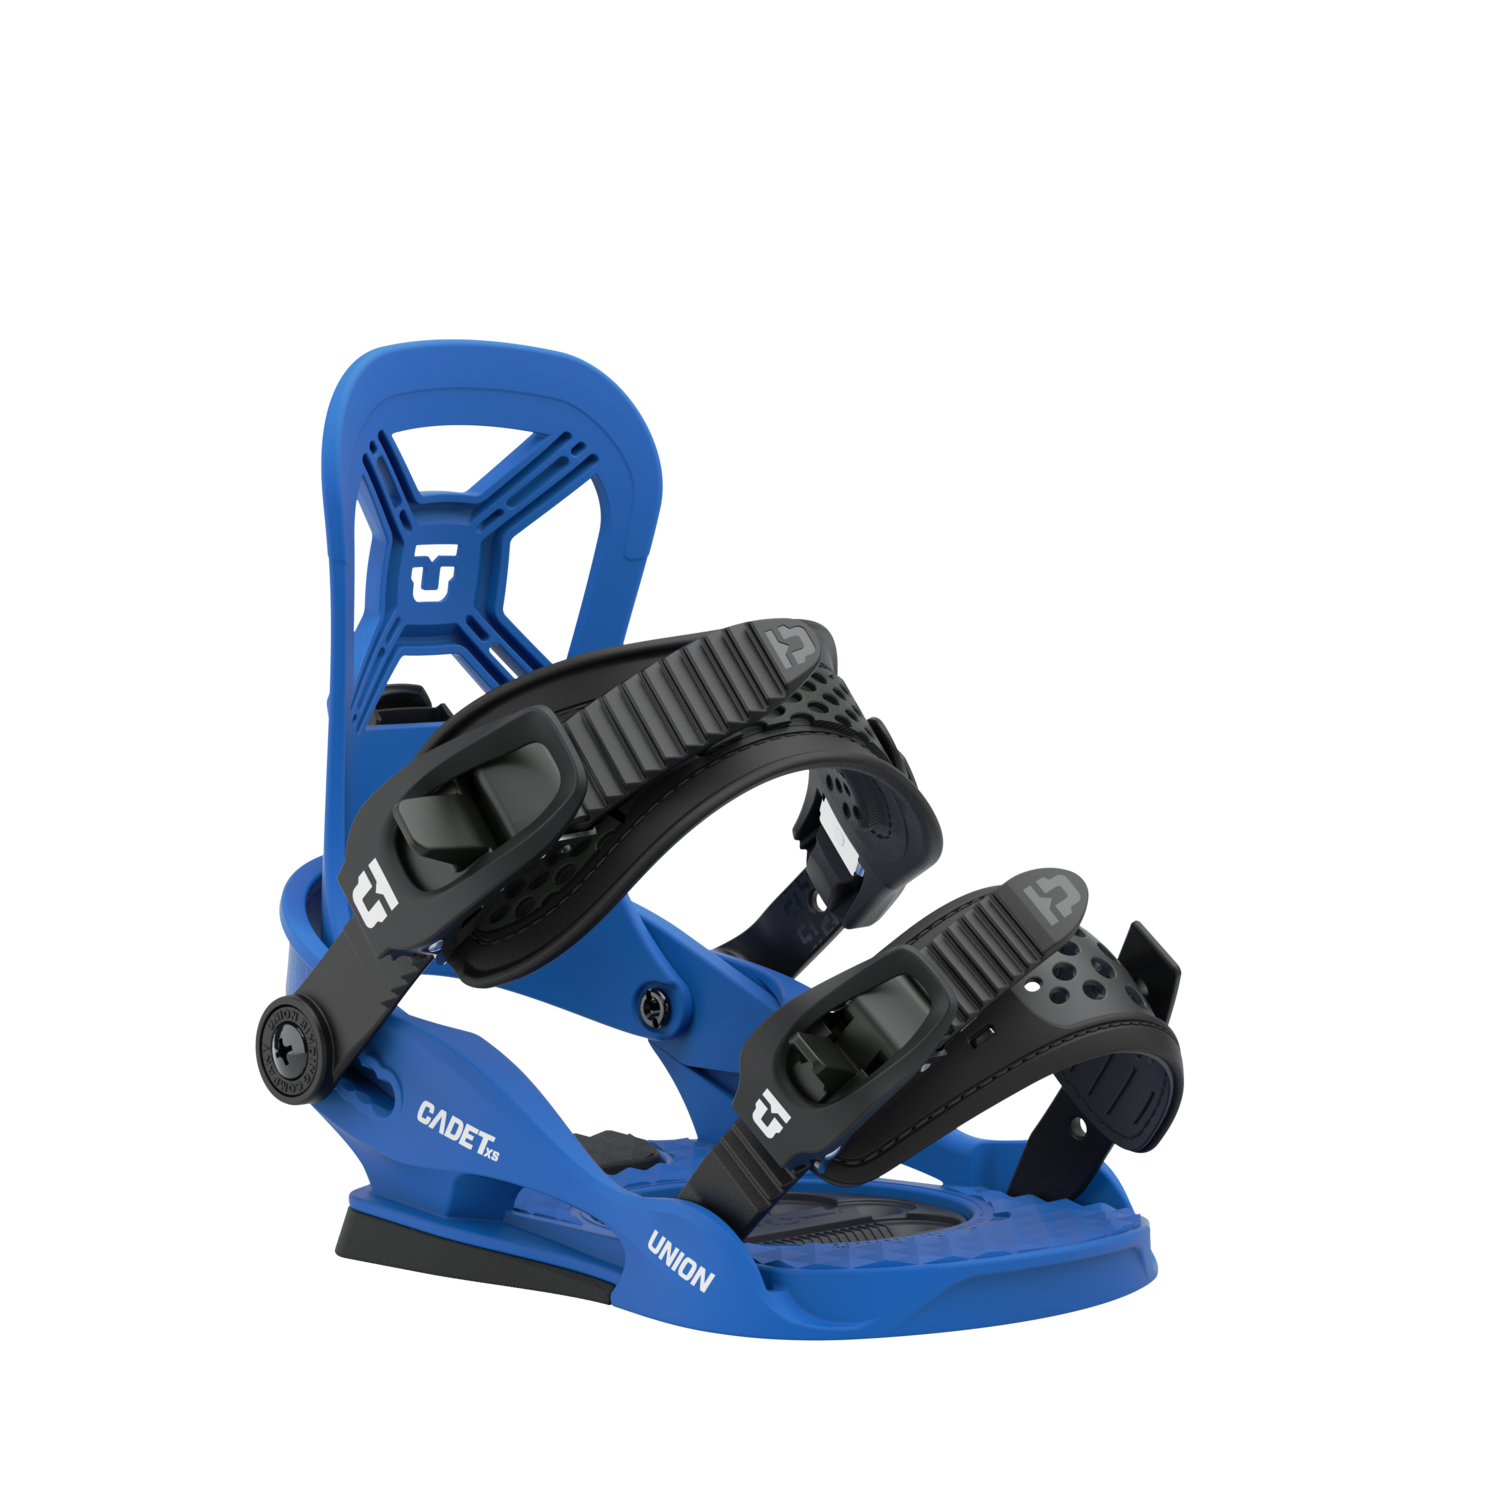 Union Cadet XS Royal Blue 2021 Snowboard Binding | Behind The Pines - Behind the